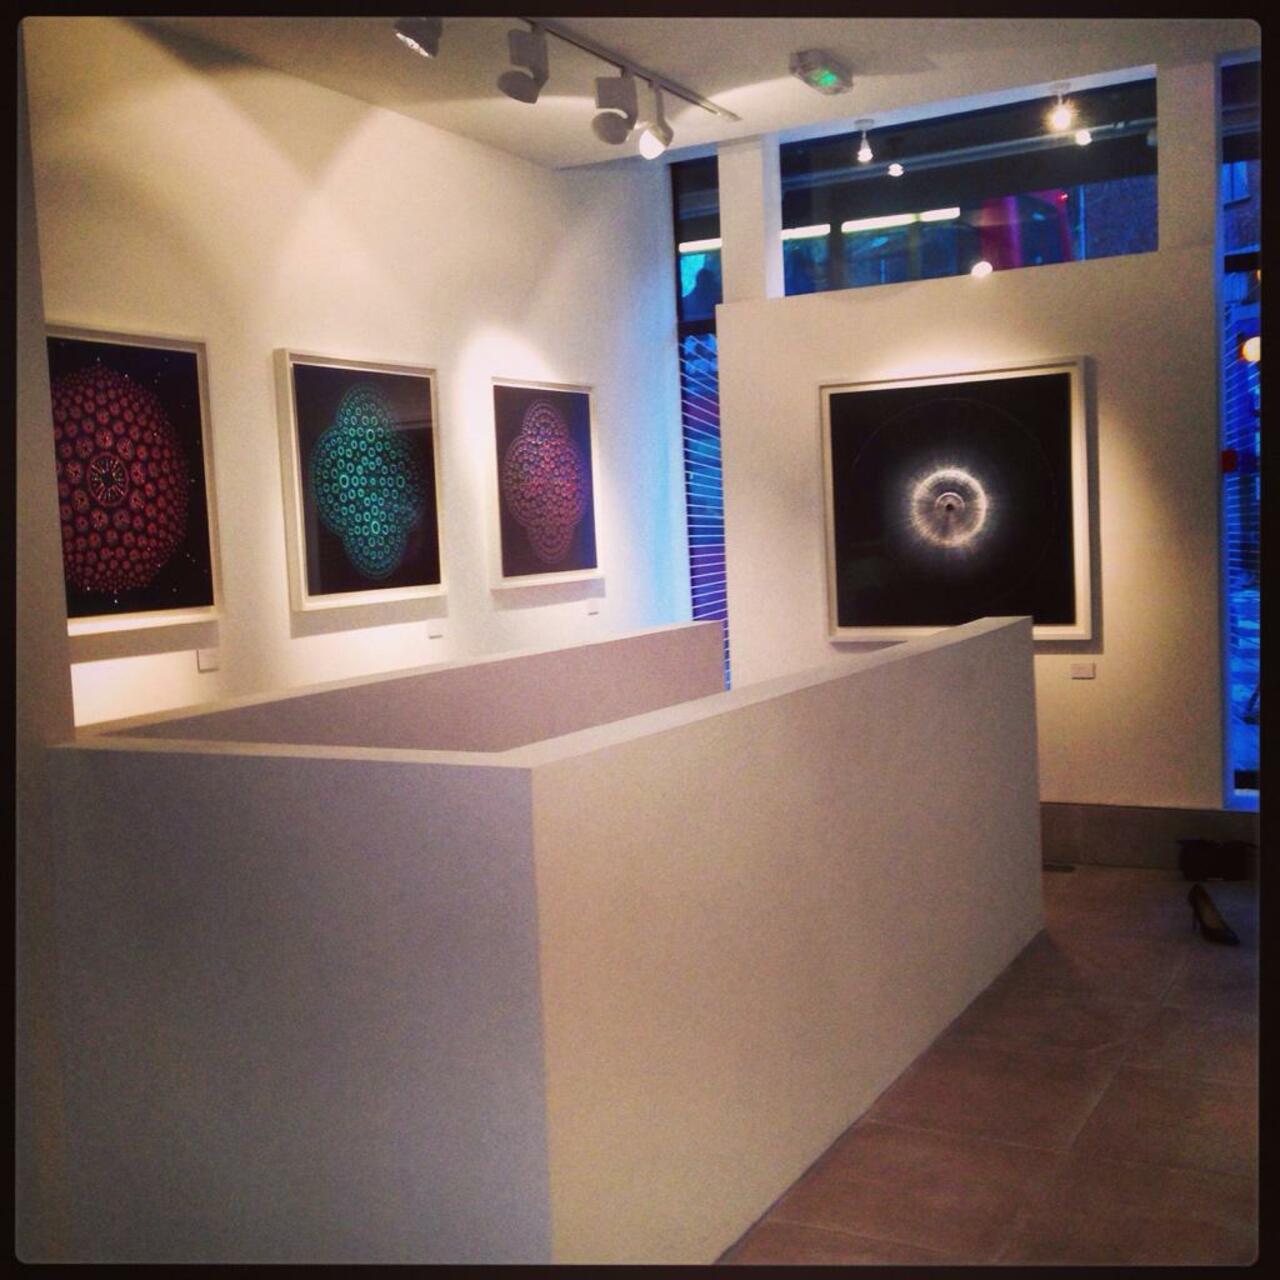 The ground floor of #serenamortongallery featuring the photographs of @abramsphoto #lightart http://t.co/QXyAid8VVe